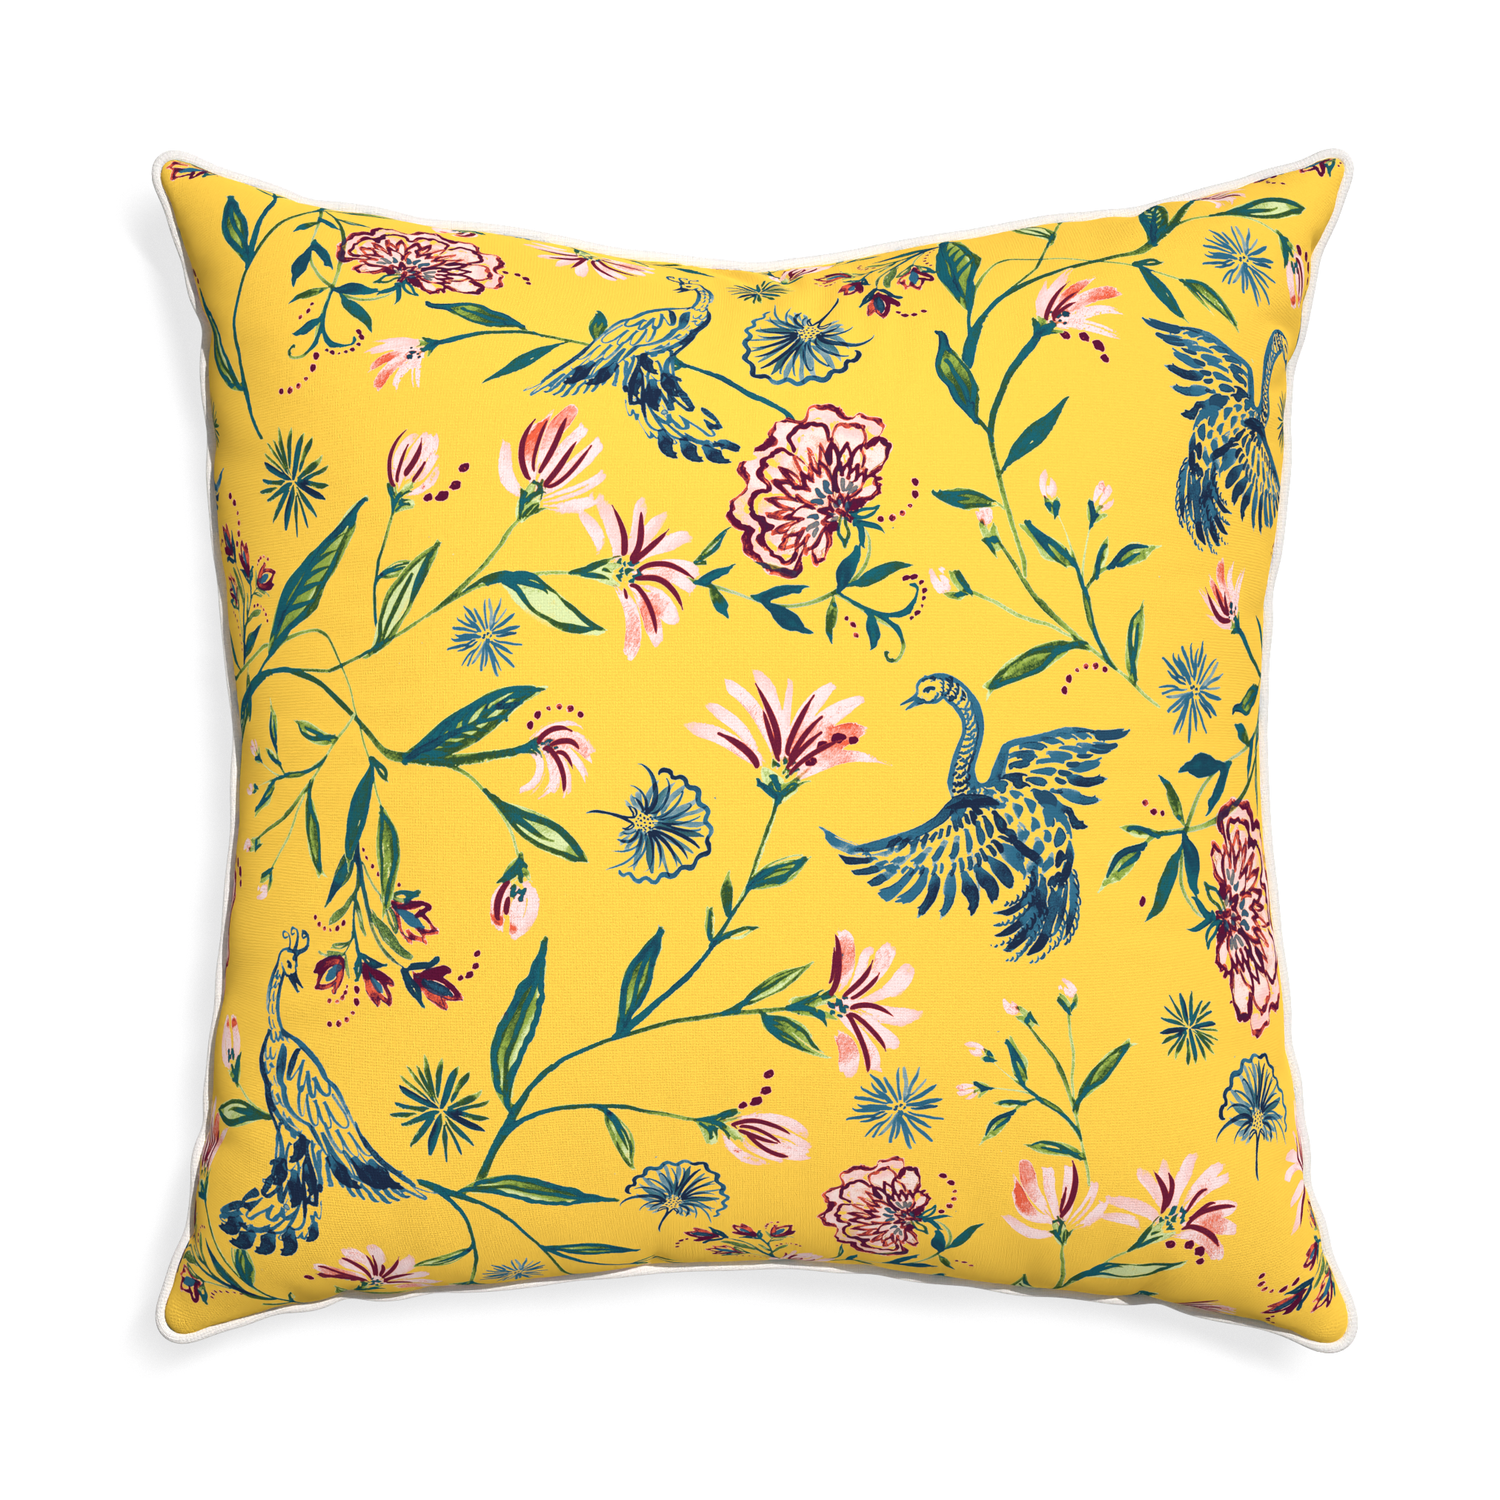 Euro-sham daphne canary custom pillow with snow piping on white background